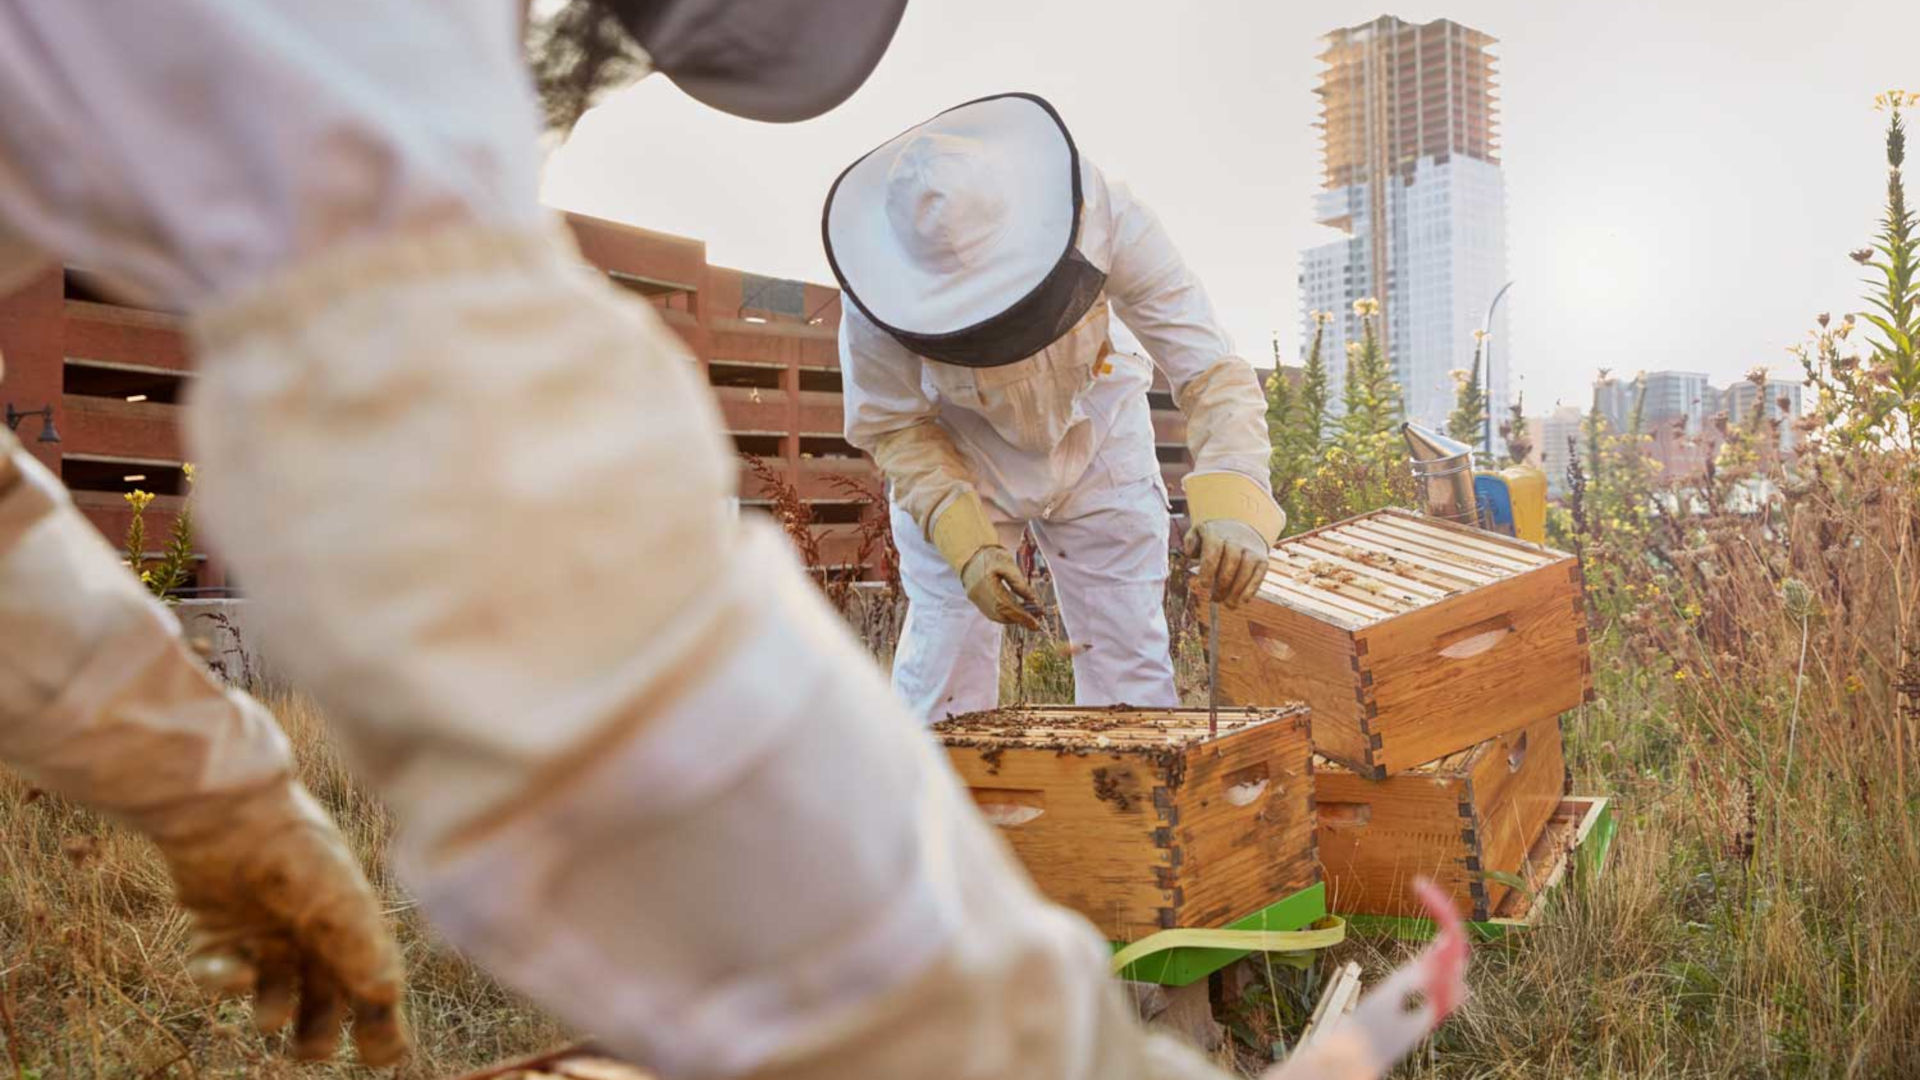 The Best Bees Company helped install beehives on Boston's Rose F. Kennedy Greenway. Here, beekeepers tend to the buzzing hives.